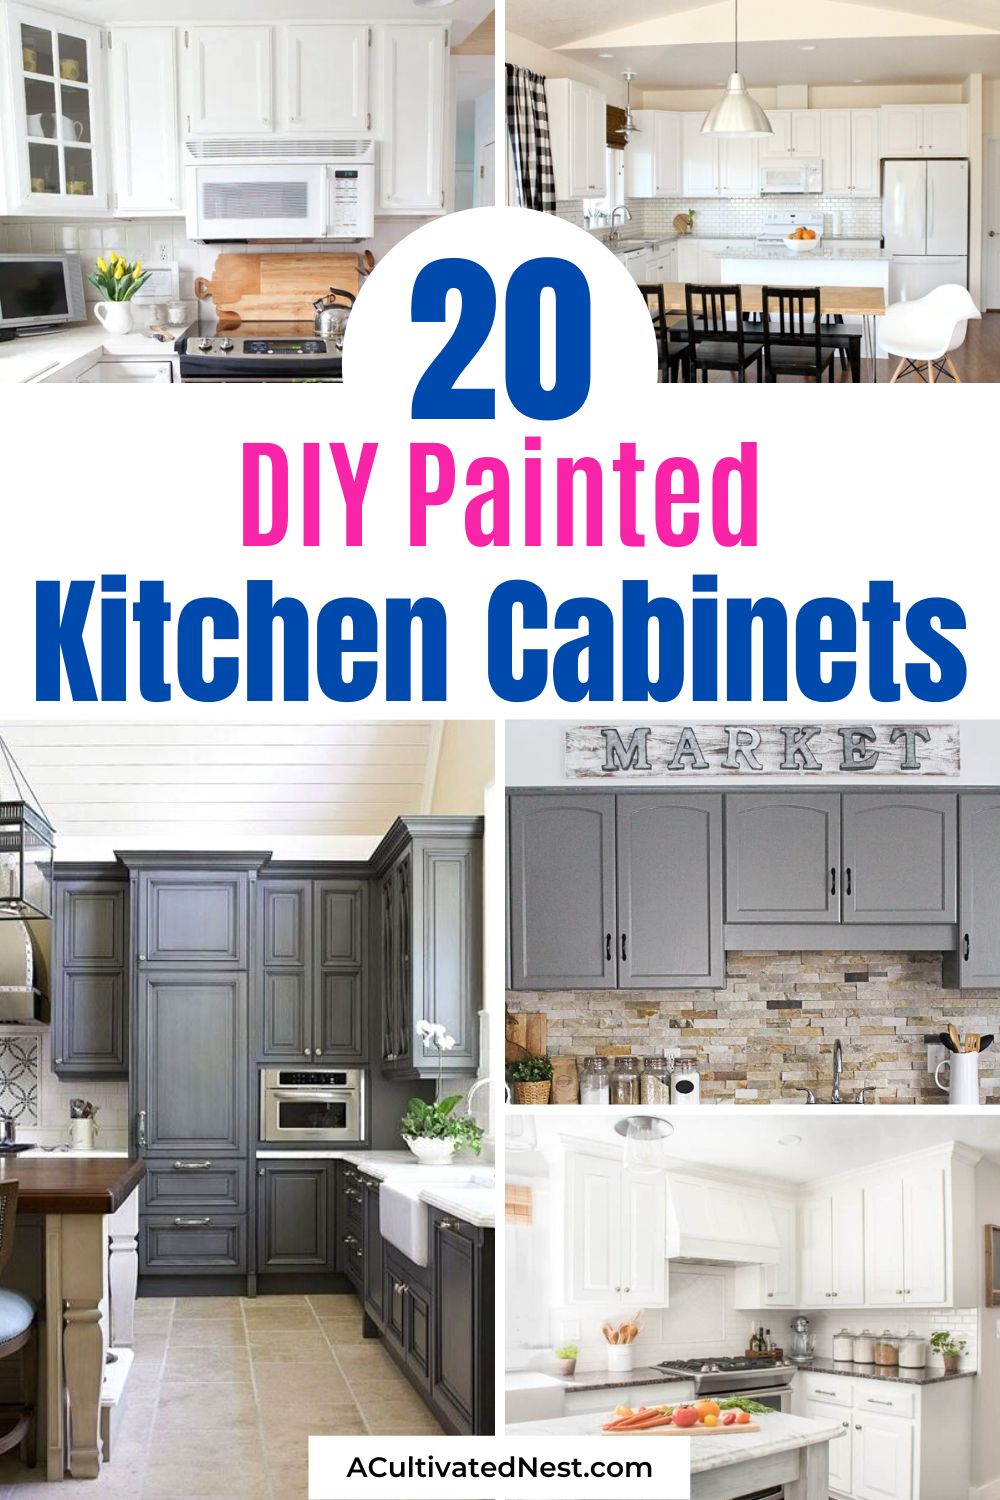 20 DIY Painted Kitchen Cabinet Ideas- If you want to update your kitchen on a budget, you'll love these inexpensive DIY painted kitchen cabinet ideas! | how to paint kitchen cabinets, #diyProjects #kitchenDIY #DIY #kitchenCabinets #ACultivatedNest